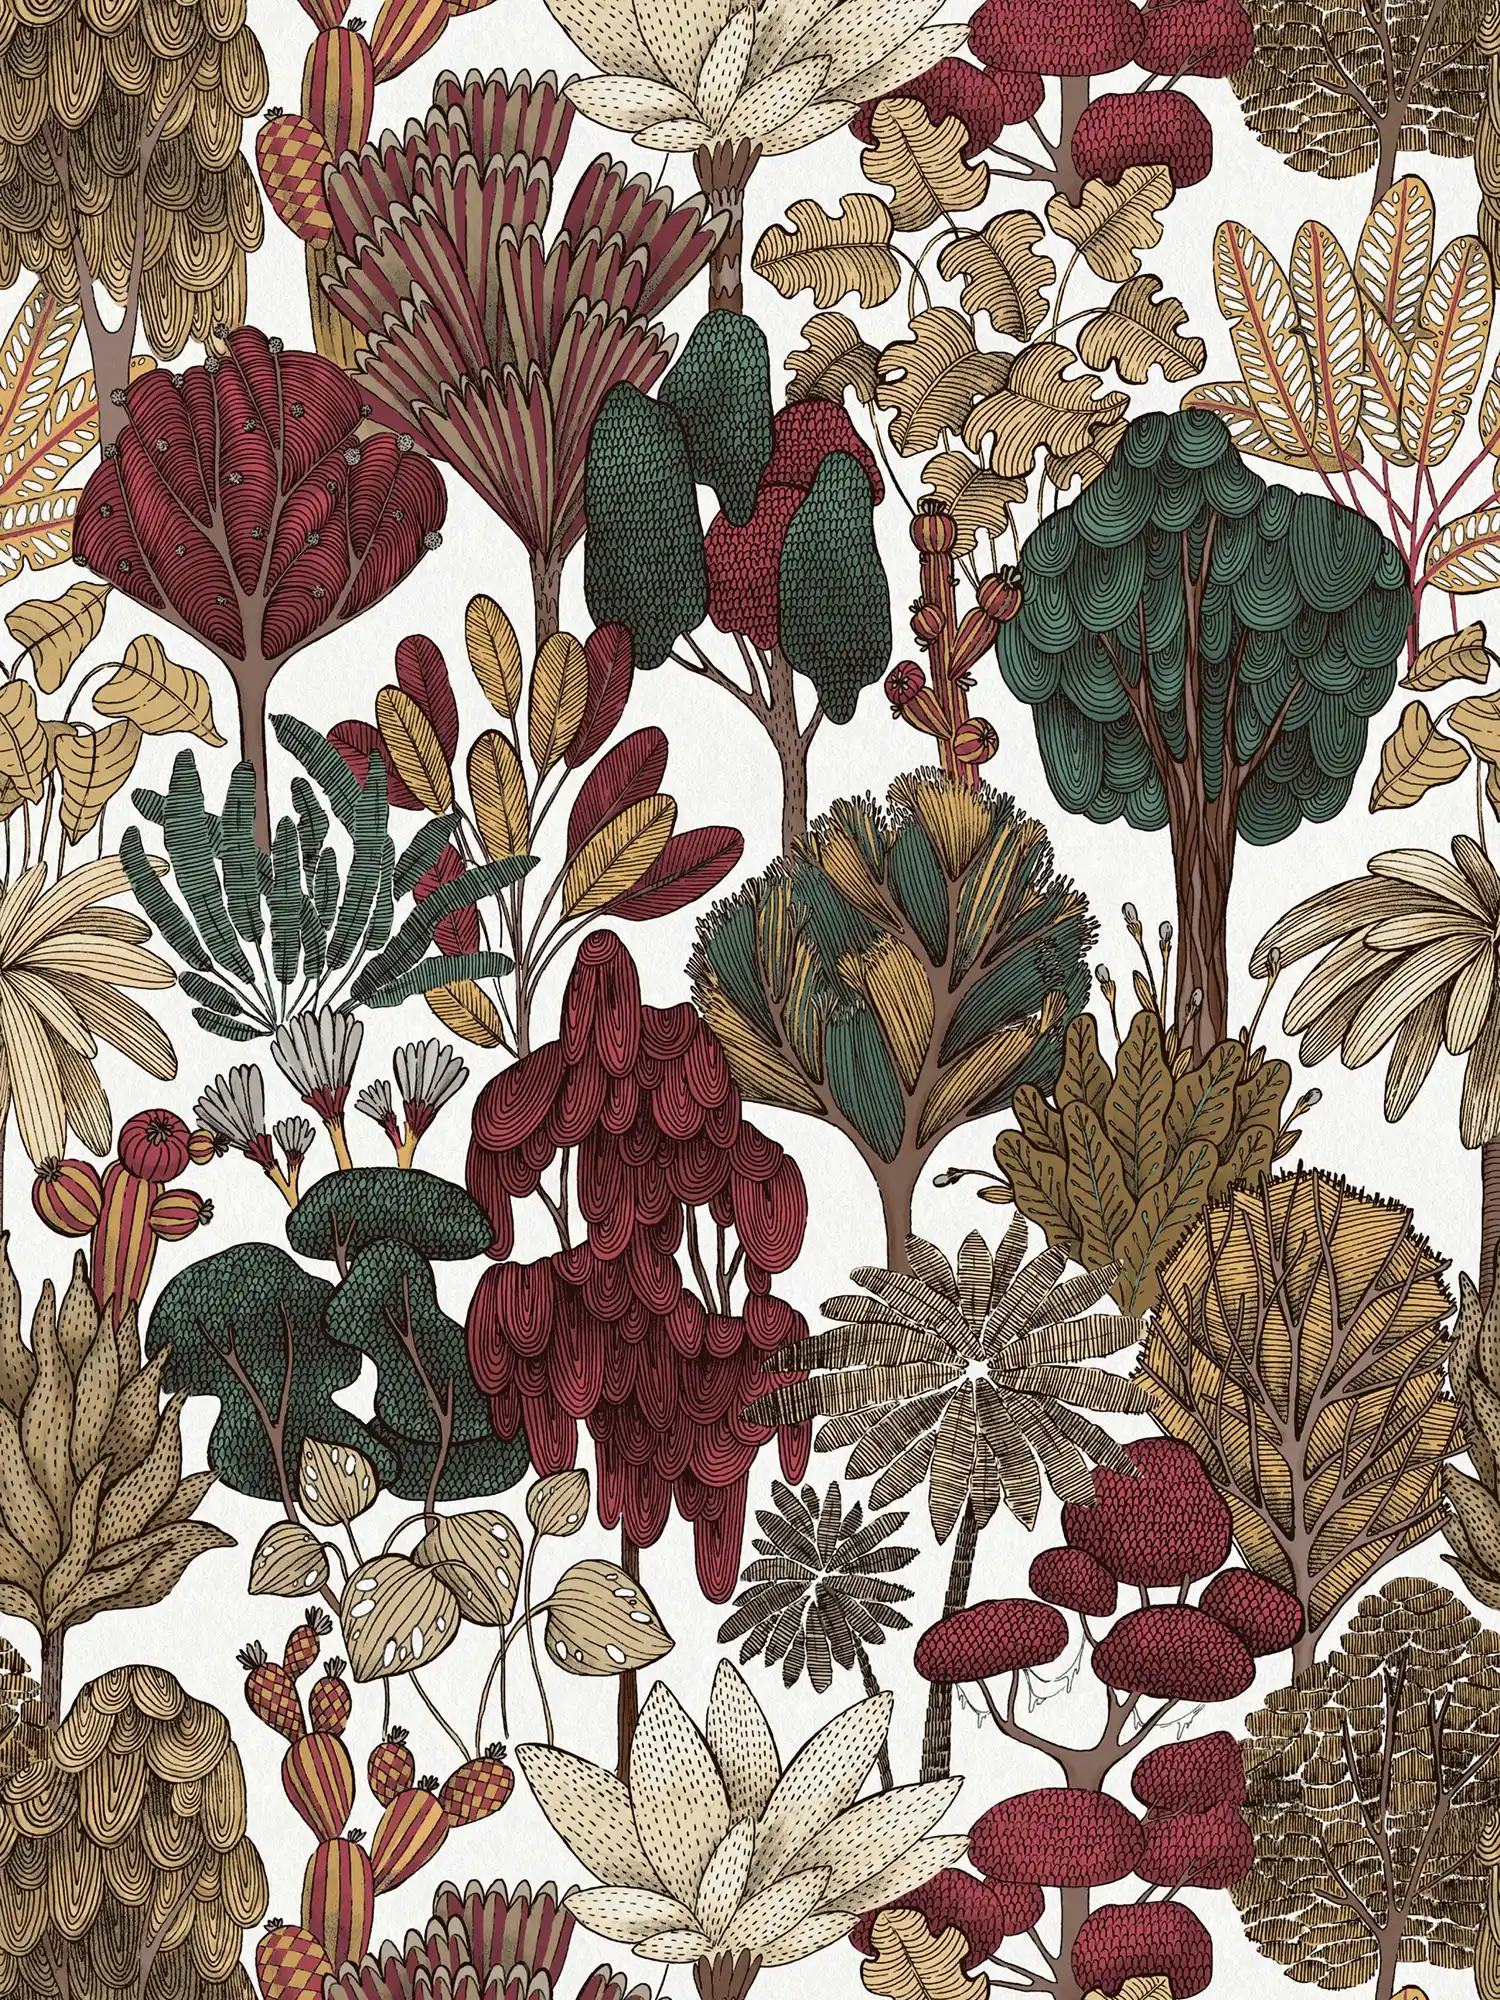         Modern wallpaper floral with trees in drawing style - red, beige, brown
    